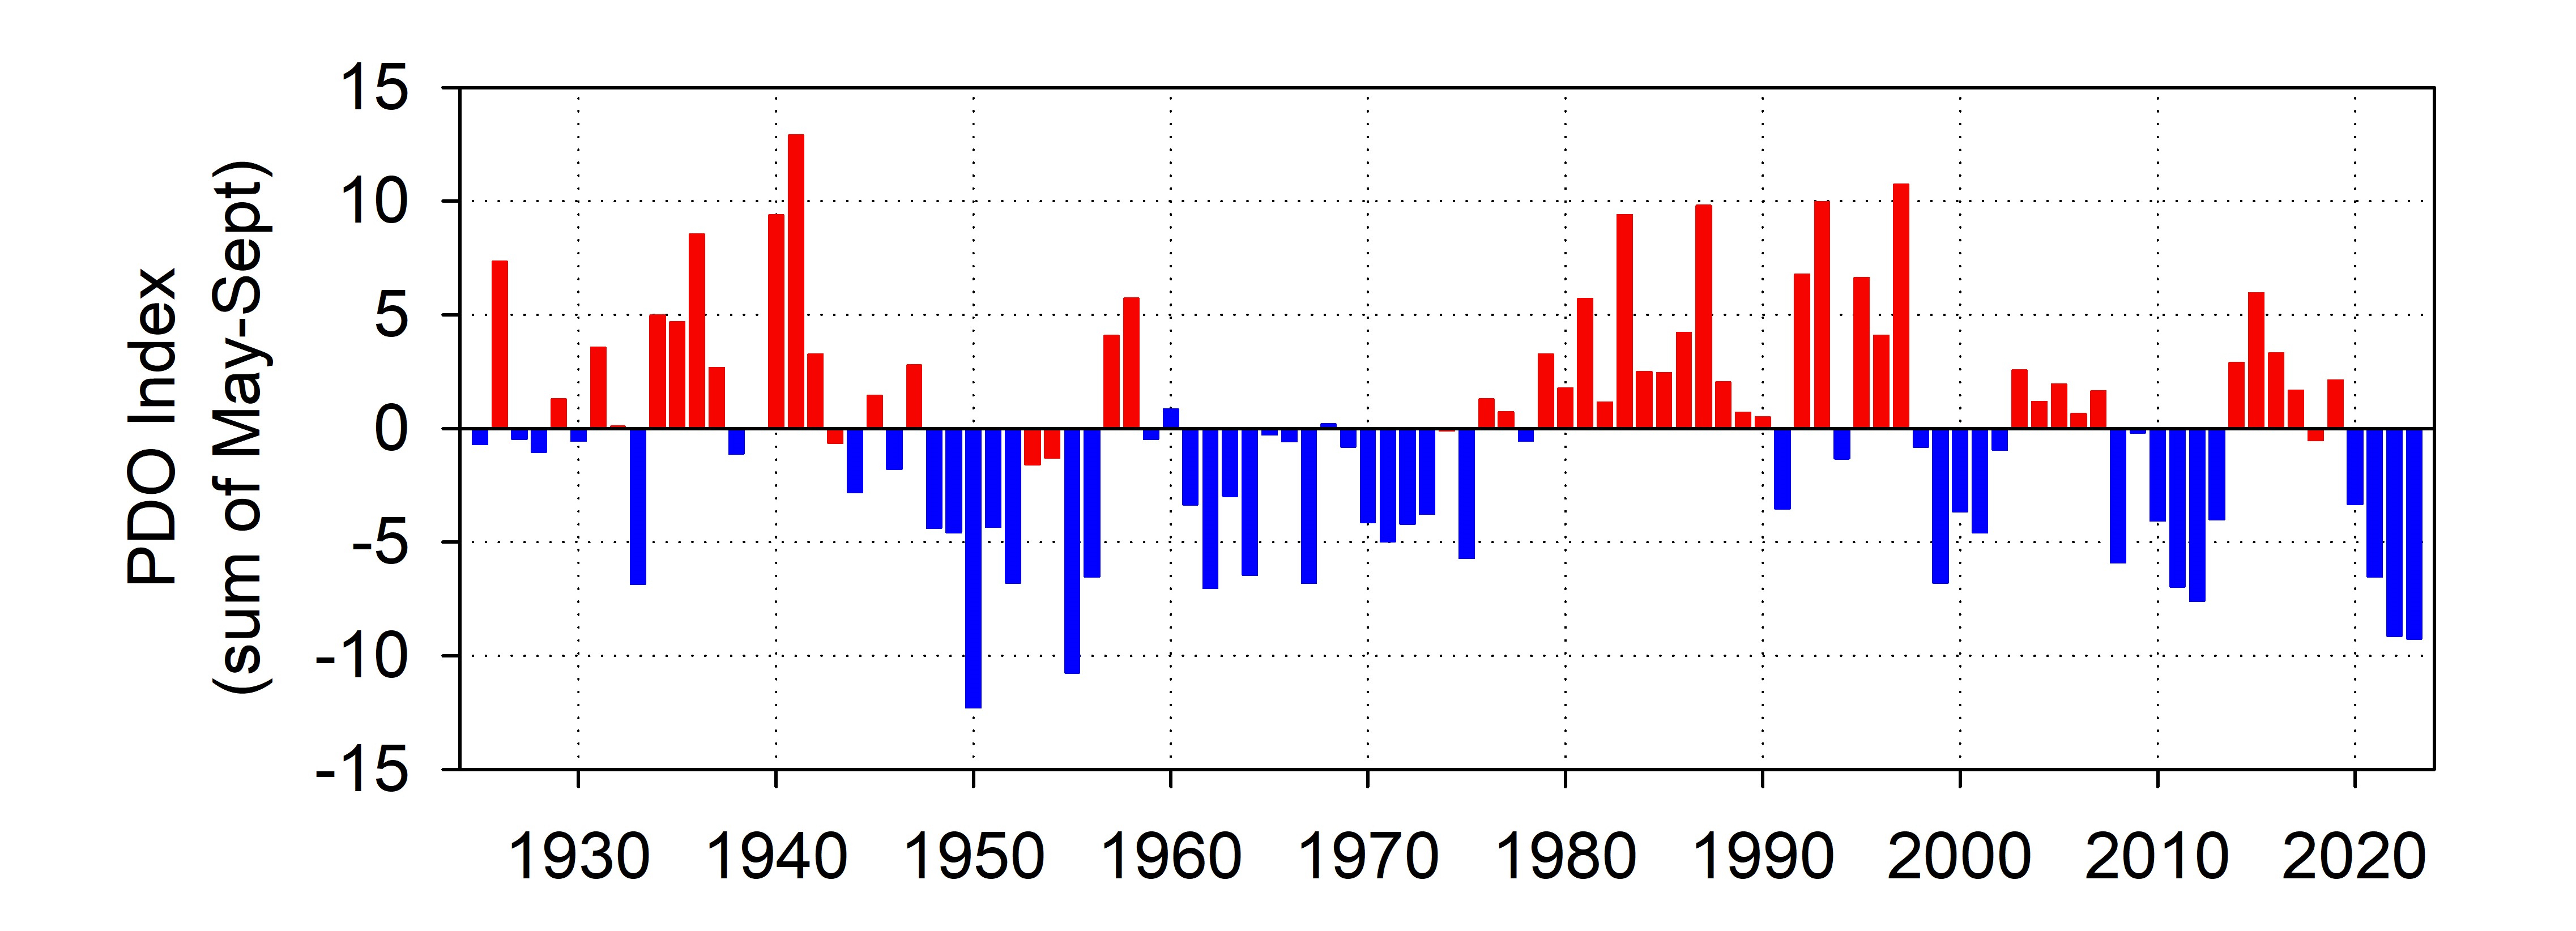  Time series of the Pacific Decadal Oscillation (PDO) from 1950 to present. Values are summed over May through September. Red bars indicate positive (warm) years; blue bars indicate negative (cool) years. 